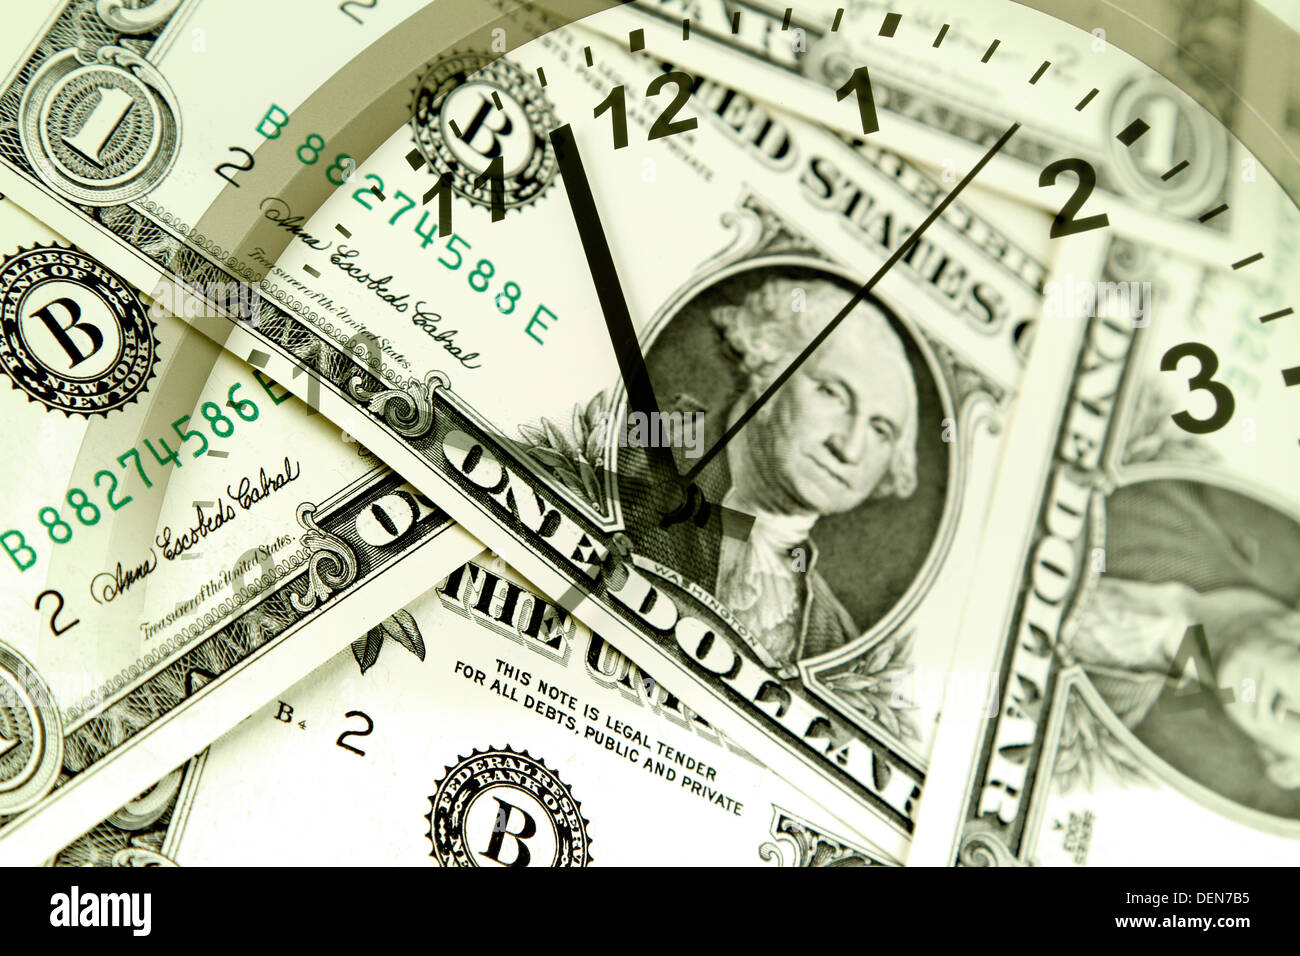 Clock and banknotes. Time is money concept Stock Photo